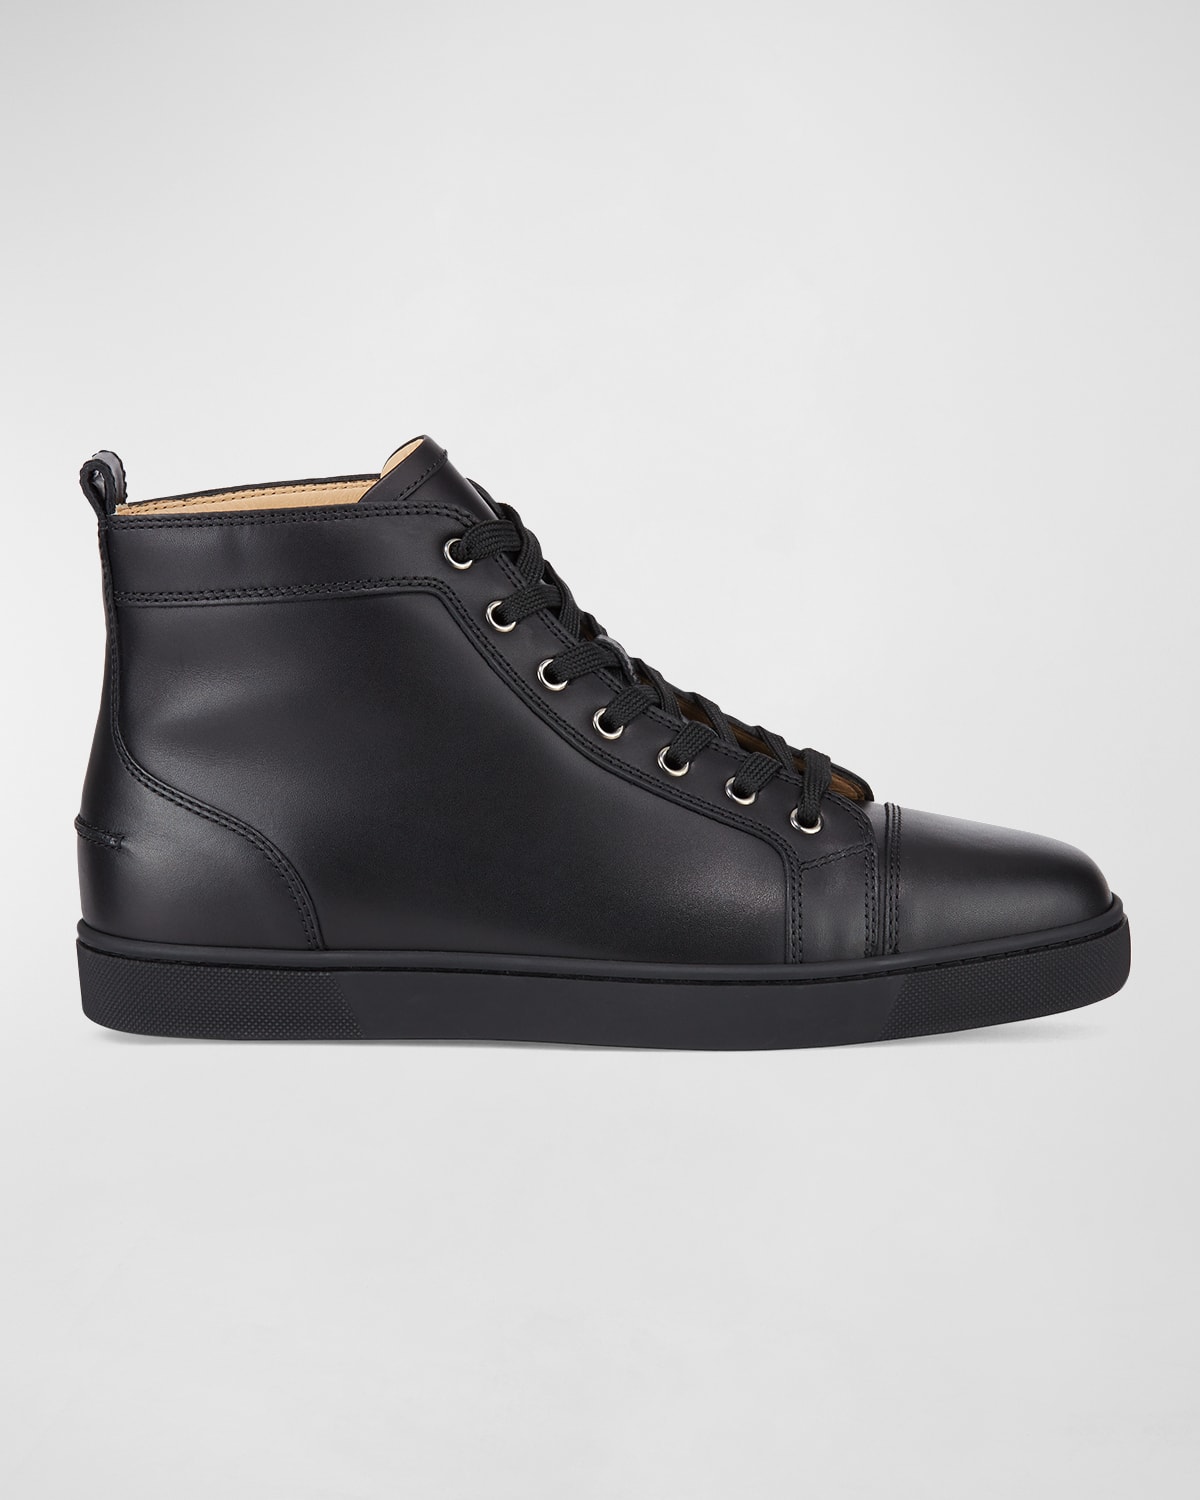 Louis - High-top sneakers - Calf leather - Black - Christian